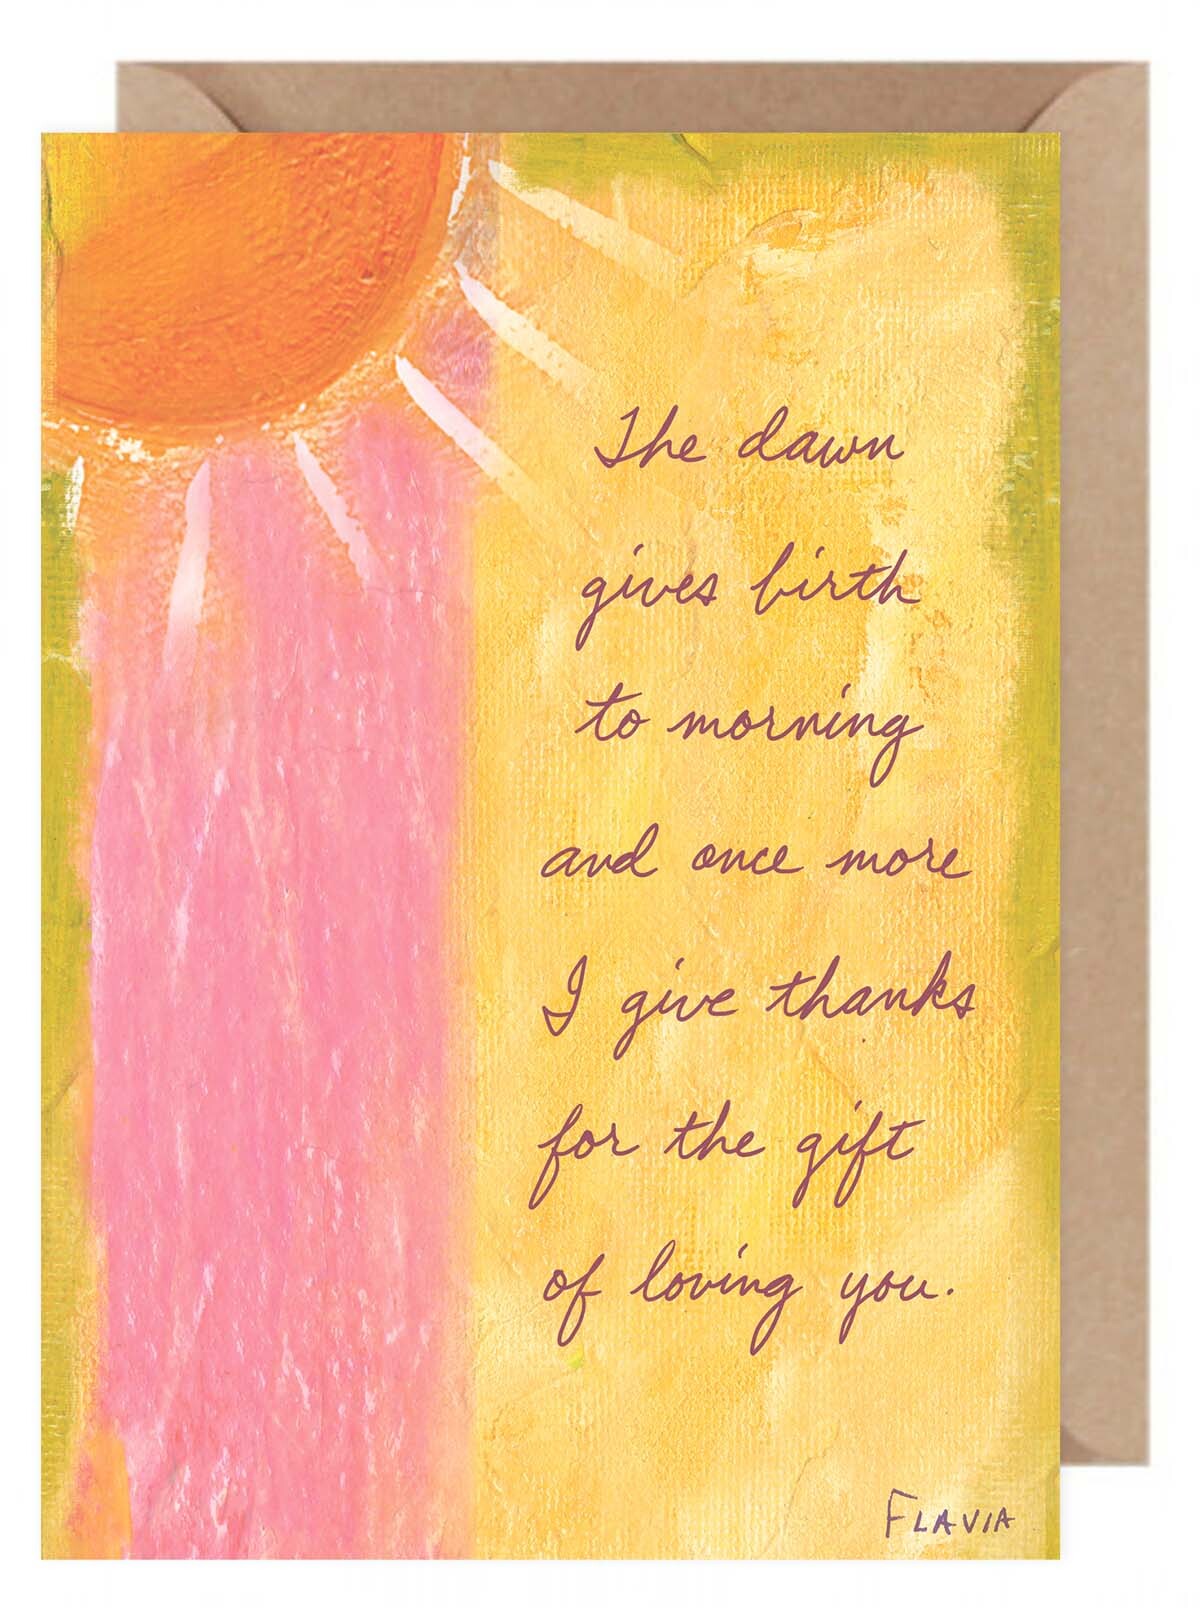 Loving You - a Flavia Weedn inspirational greeting card  0101-0045